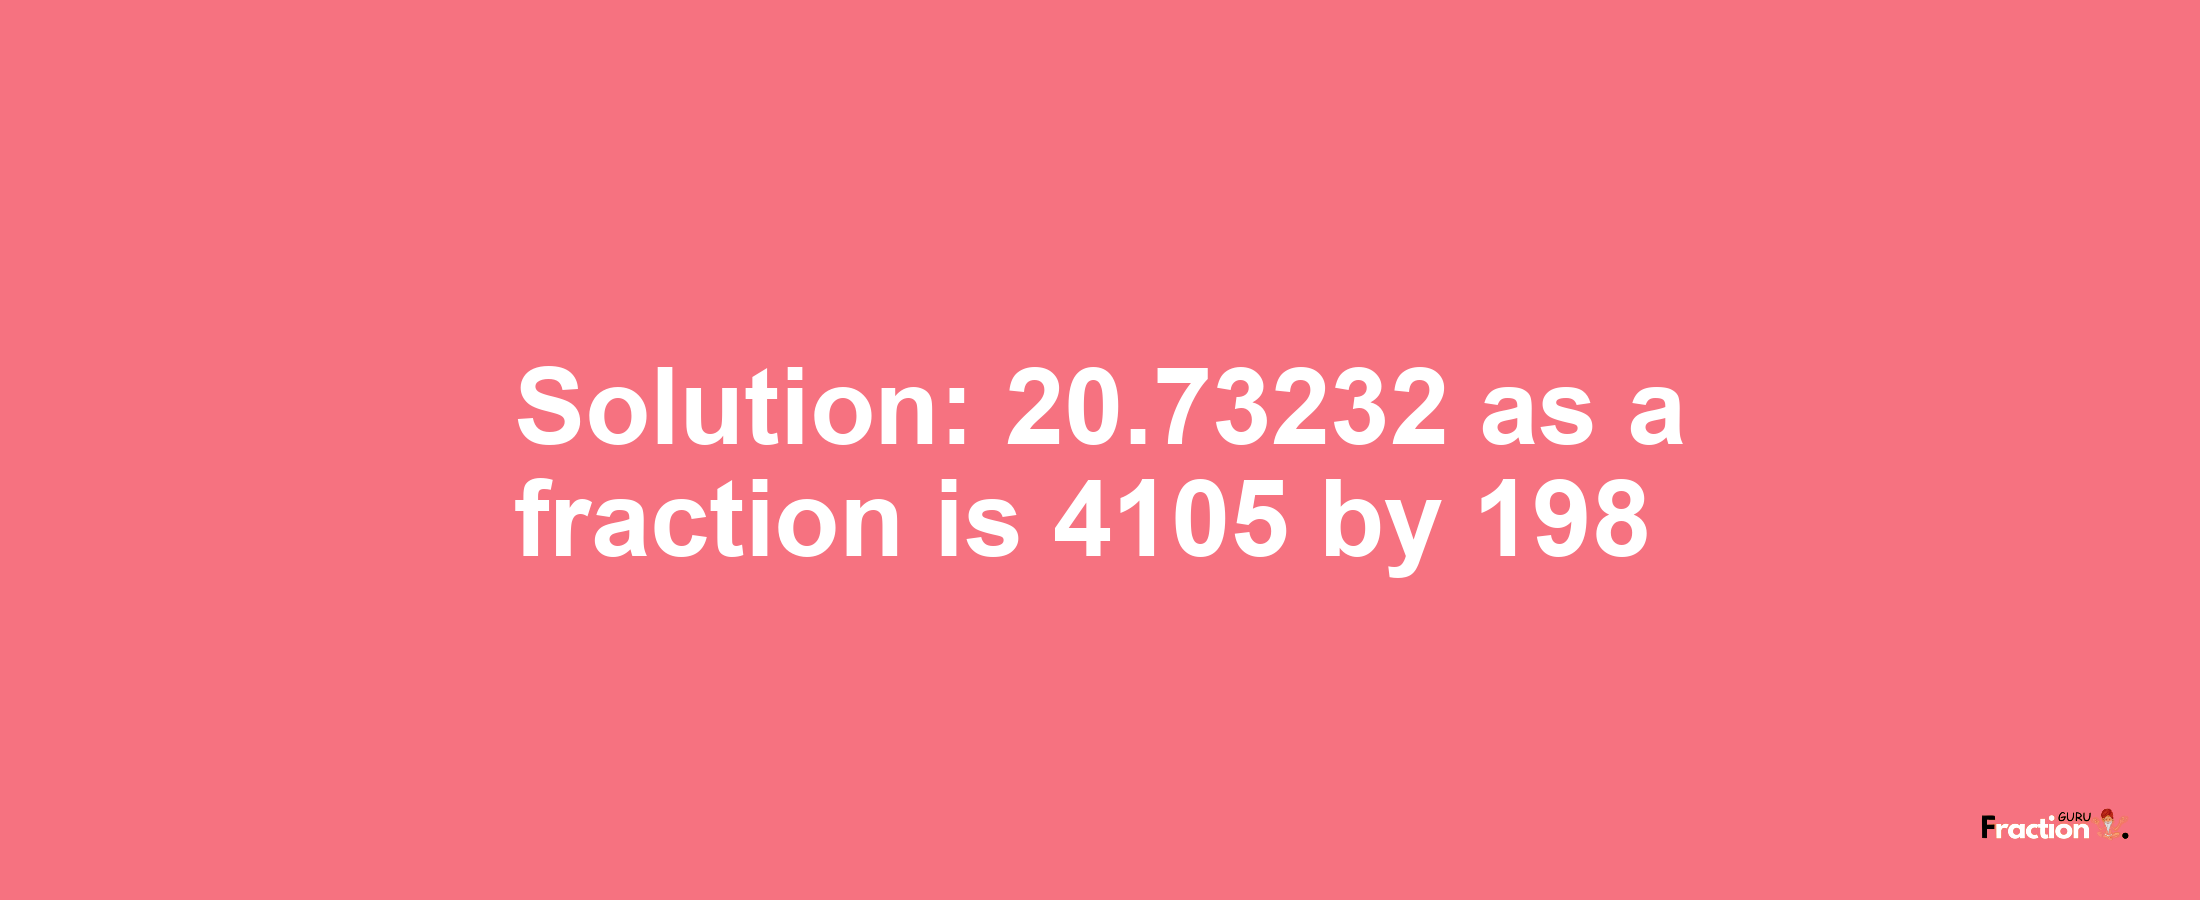 Solution:20.73232 as a fraction is 4105/198